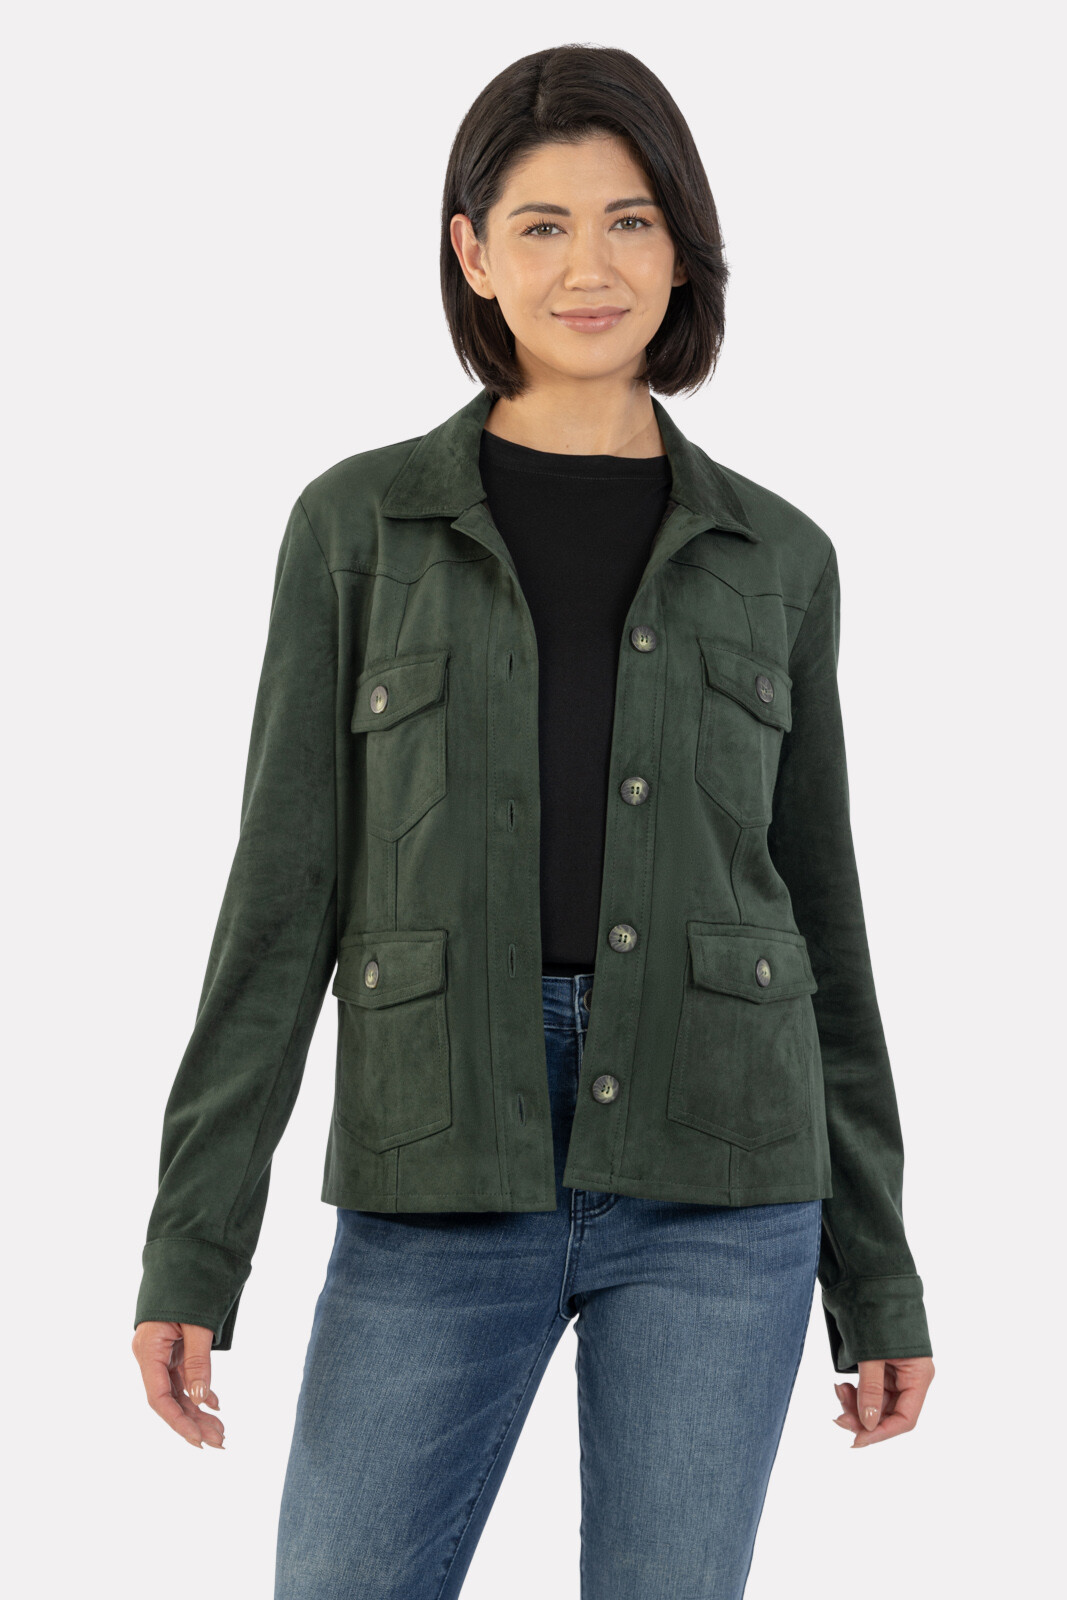 KUT FROM THE KLOTH Lilee Button Jacket with Flap Pockets | EVEREVE